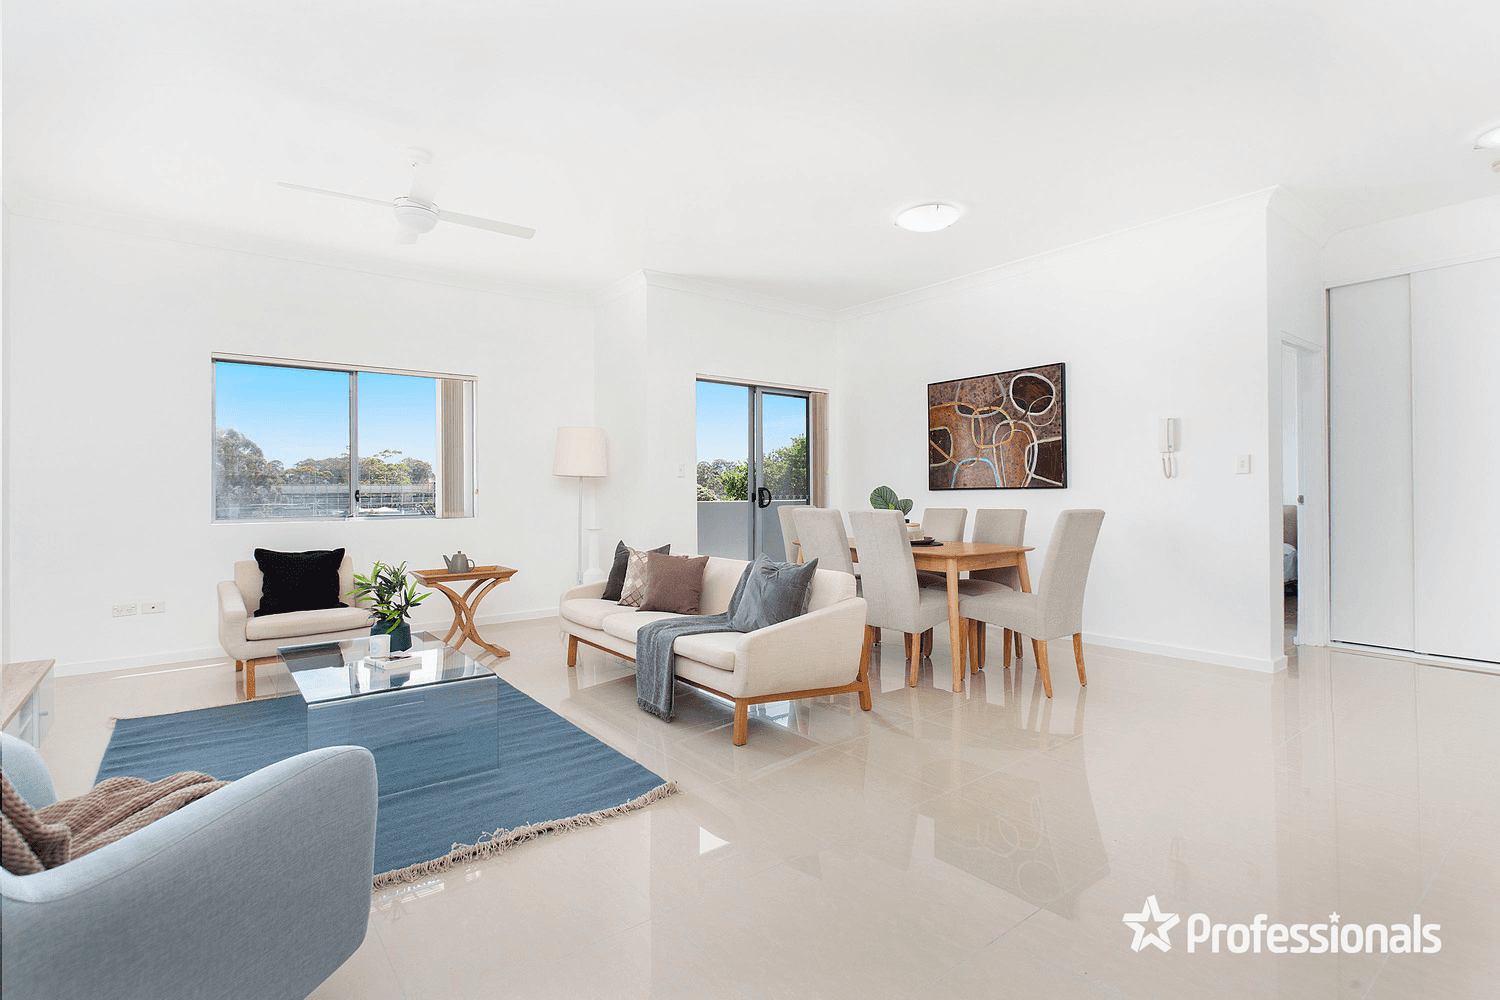 36/4 Macarthur Avenue, Revesby, NSW 2212